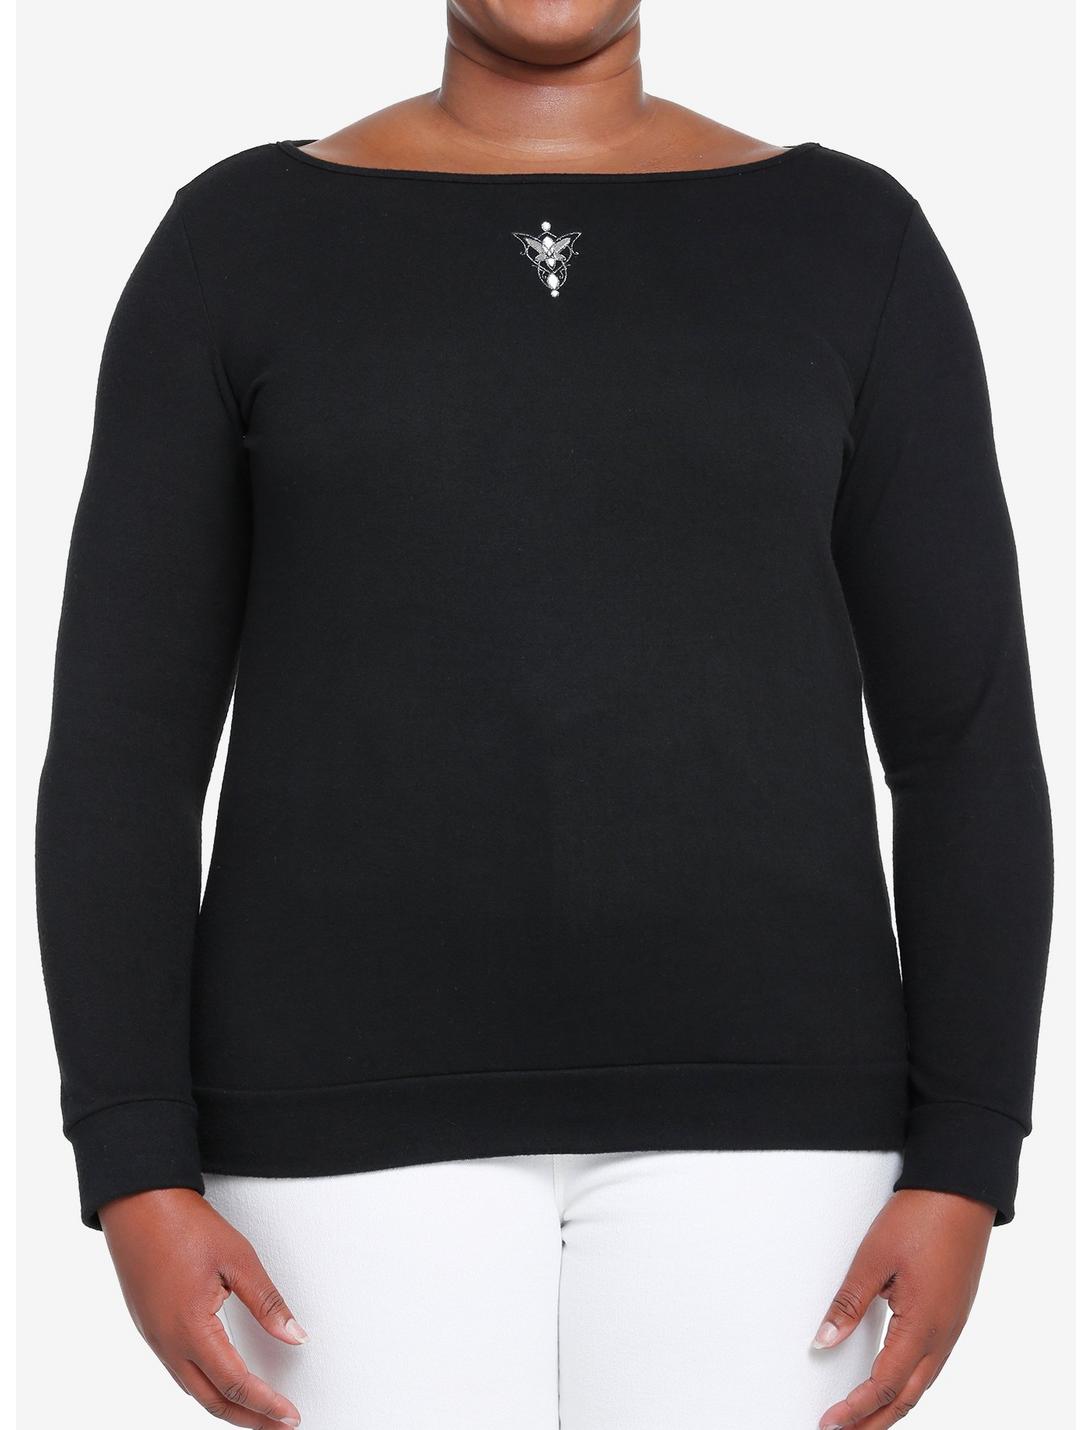 Her Universe The Lord Of The Rings Arwen Evenstar Sweater Plus Size Her Universe Exclusive, MULTI, hi-res